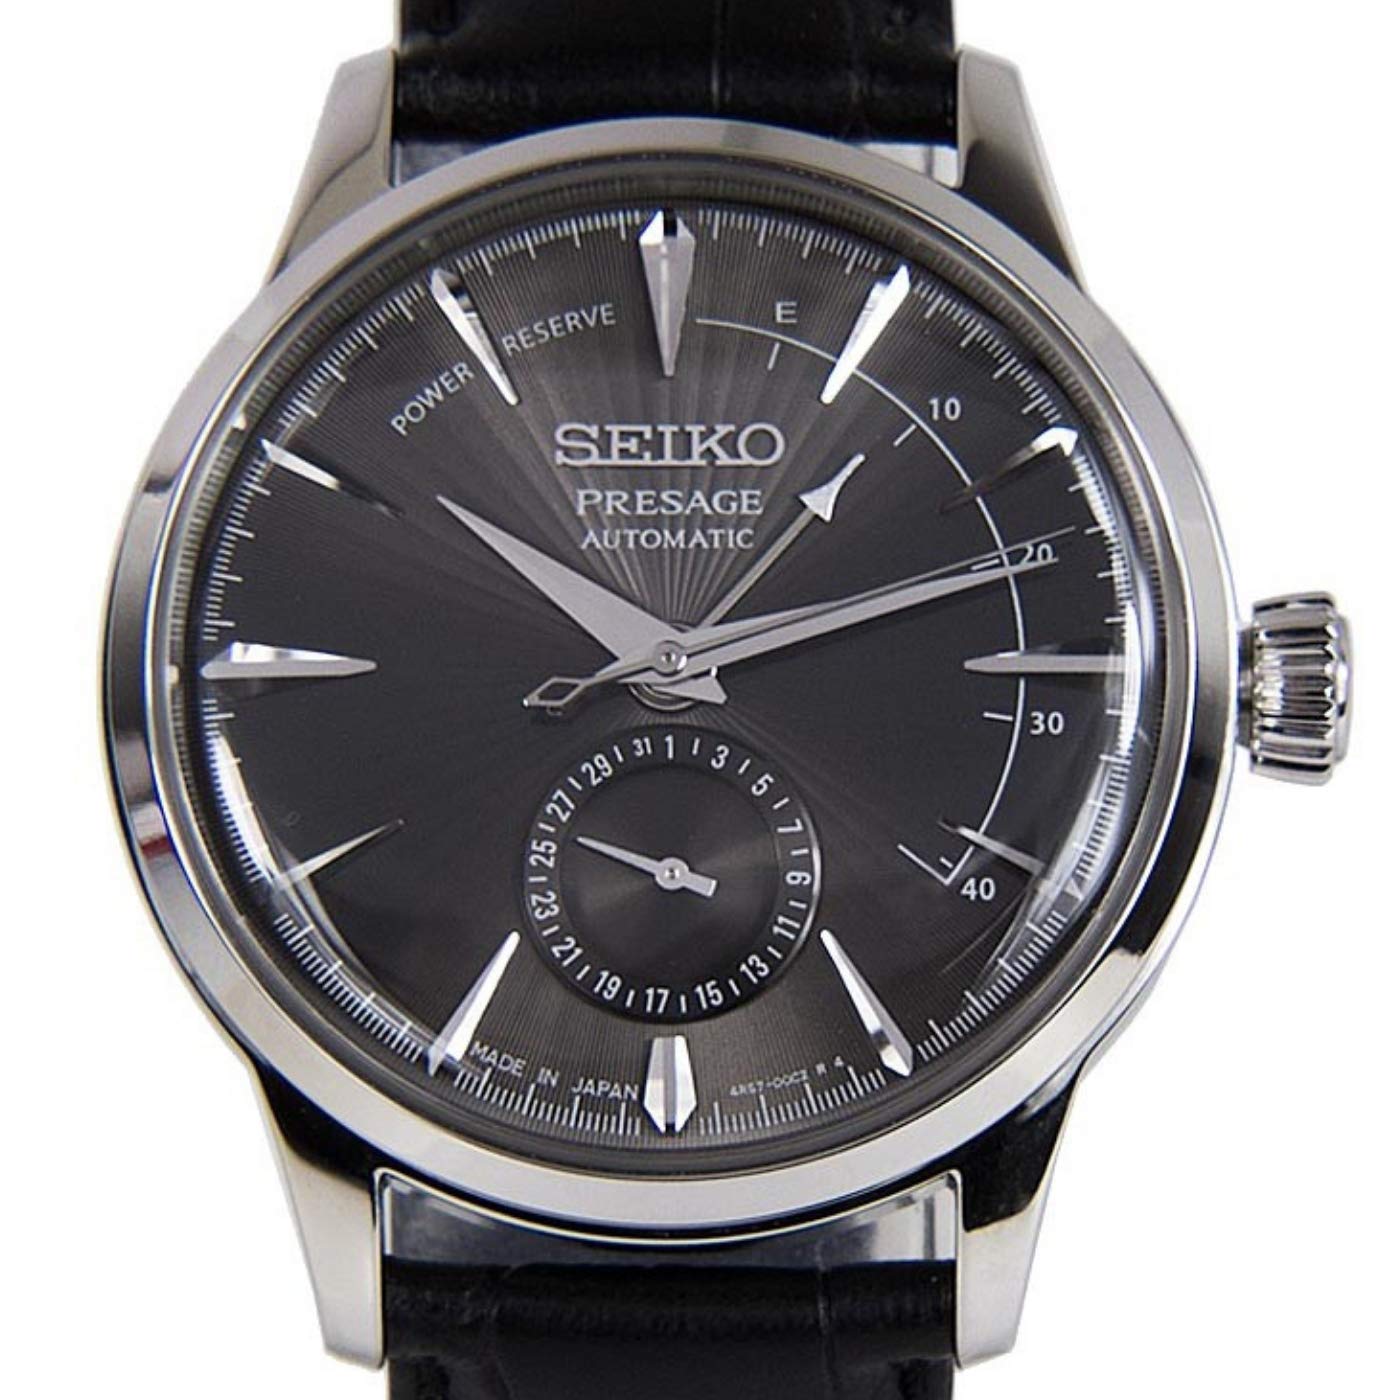 SEIKO Mens Analogue Automatic Watch with Leather Strap SSA345J1, Bracelet